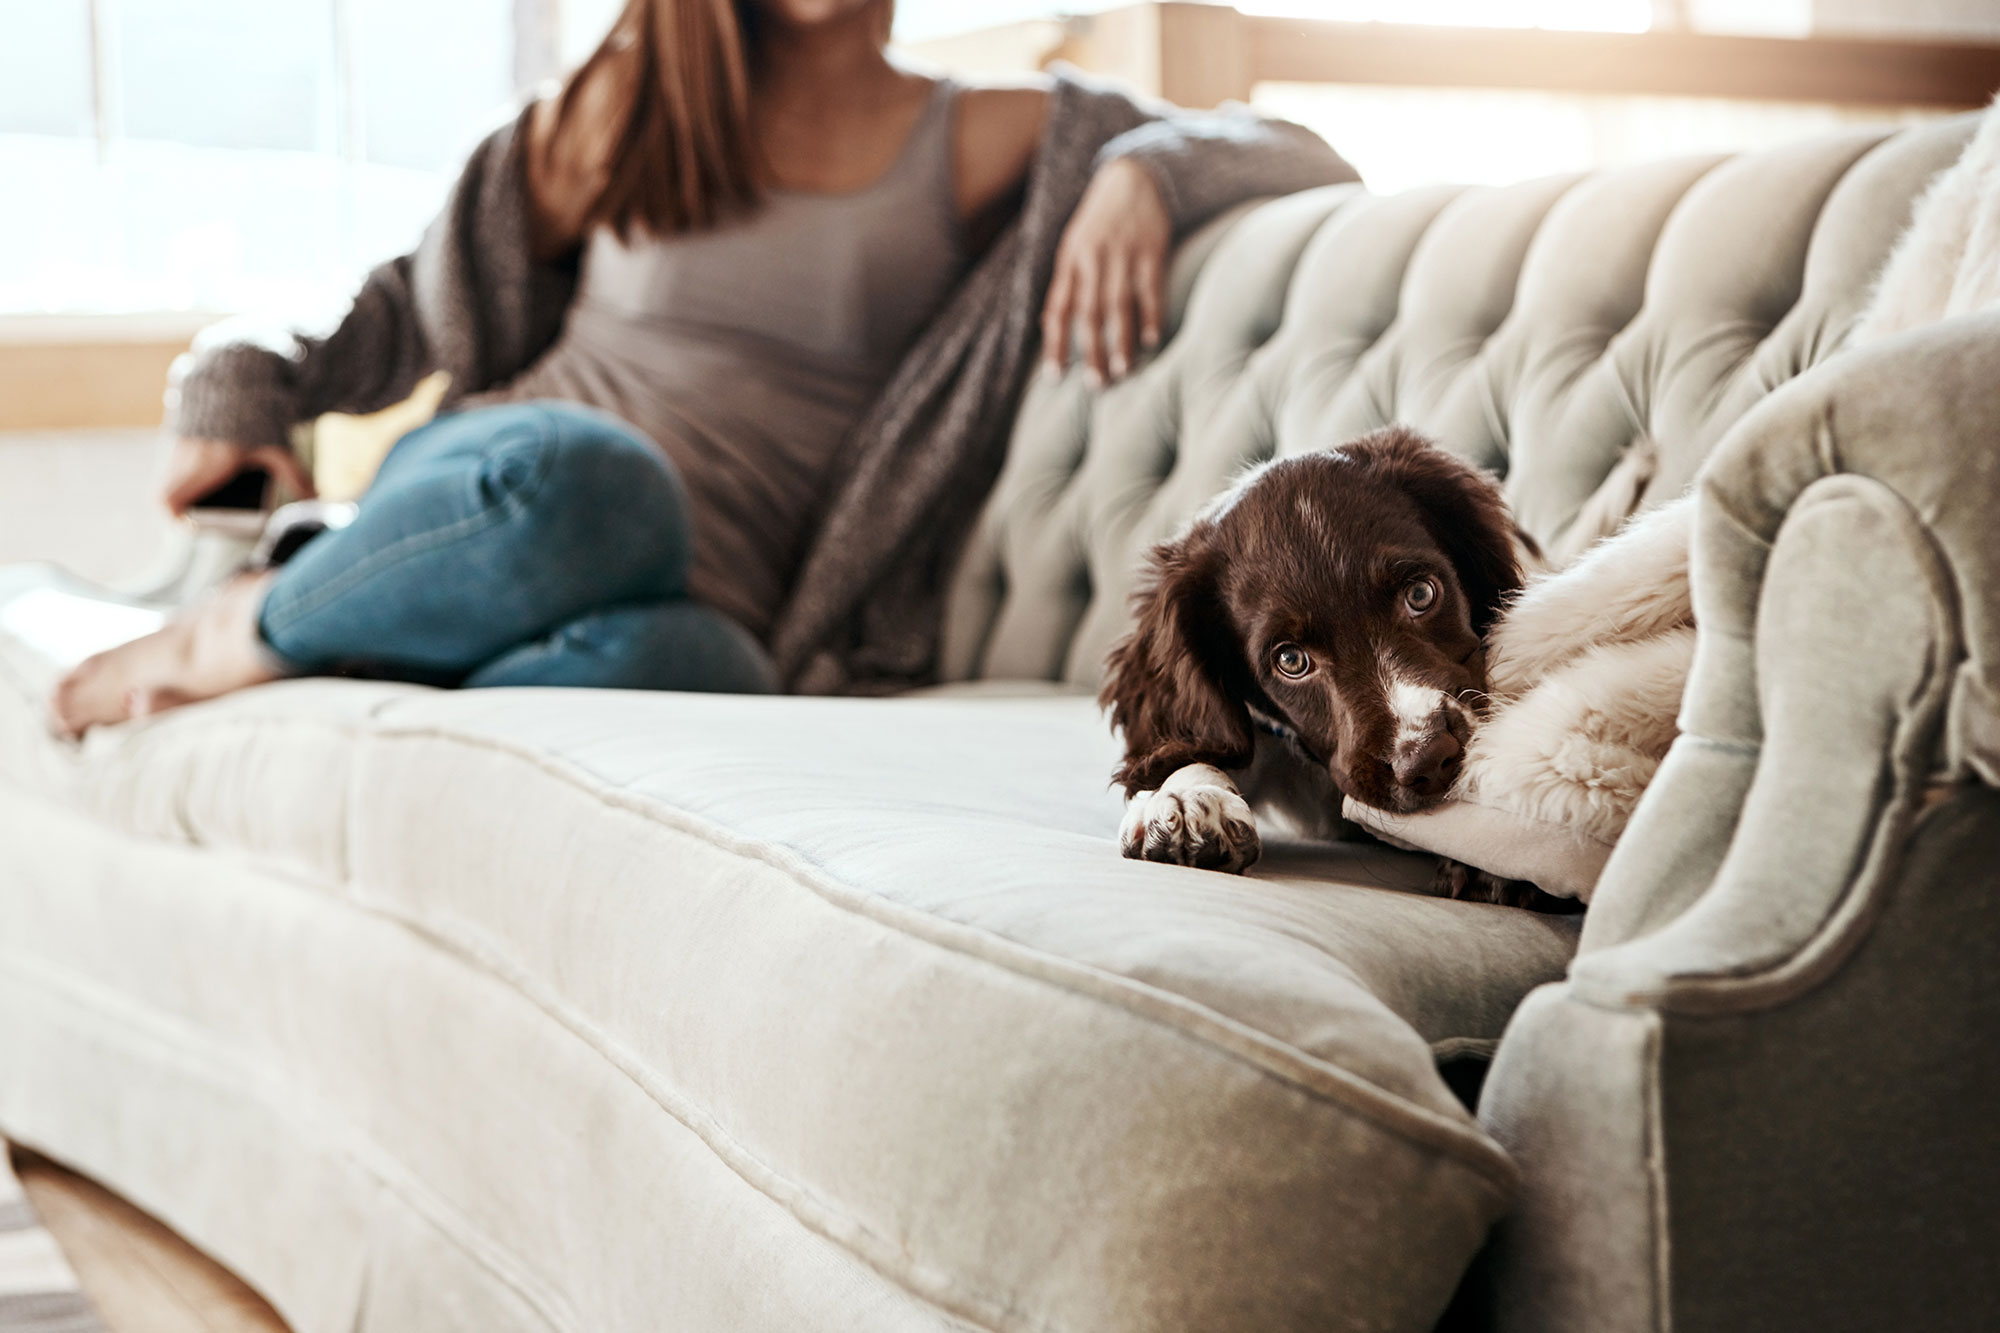 Spaniel puppy playing with a pillow on a couch at home with female owner in the background